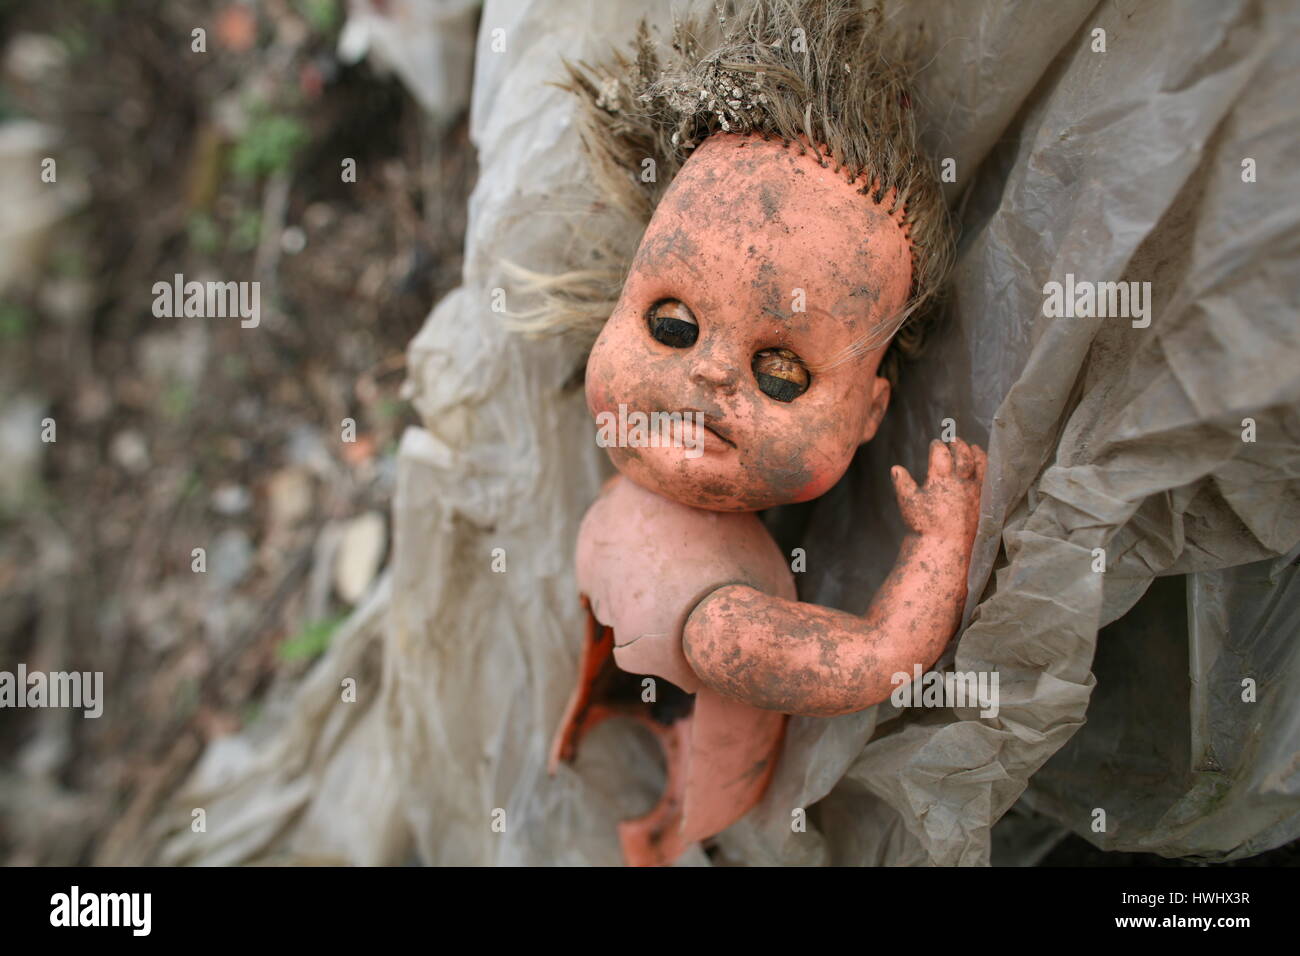 destroyed baby doll Stock Photo